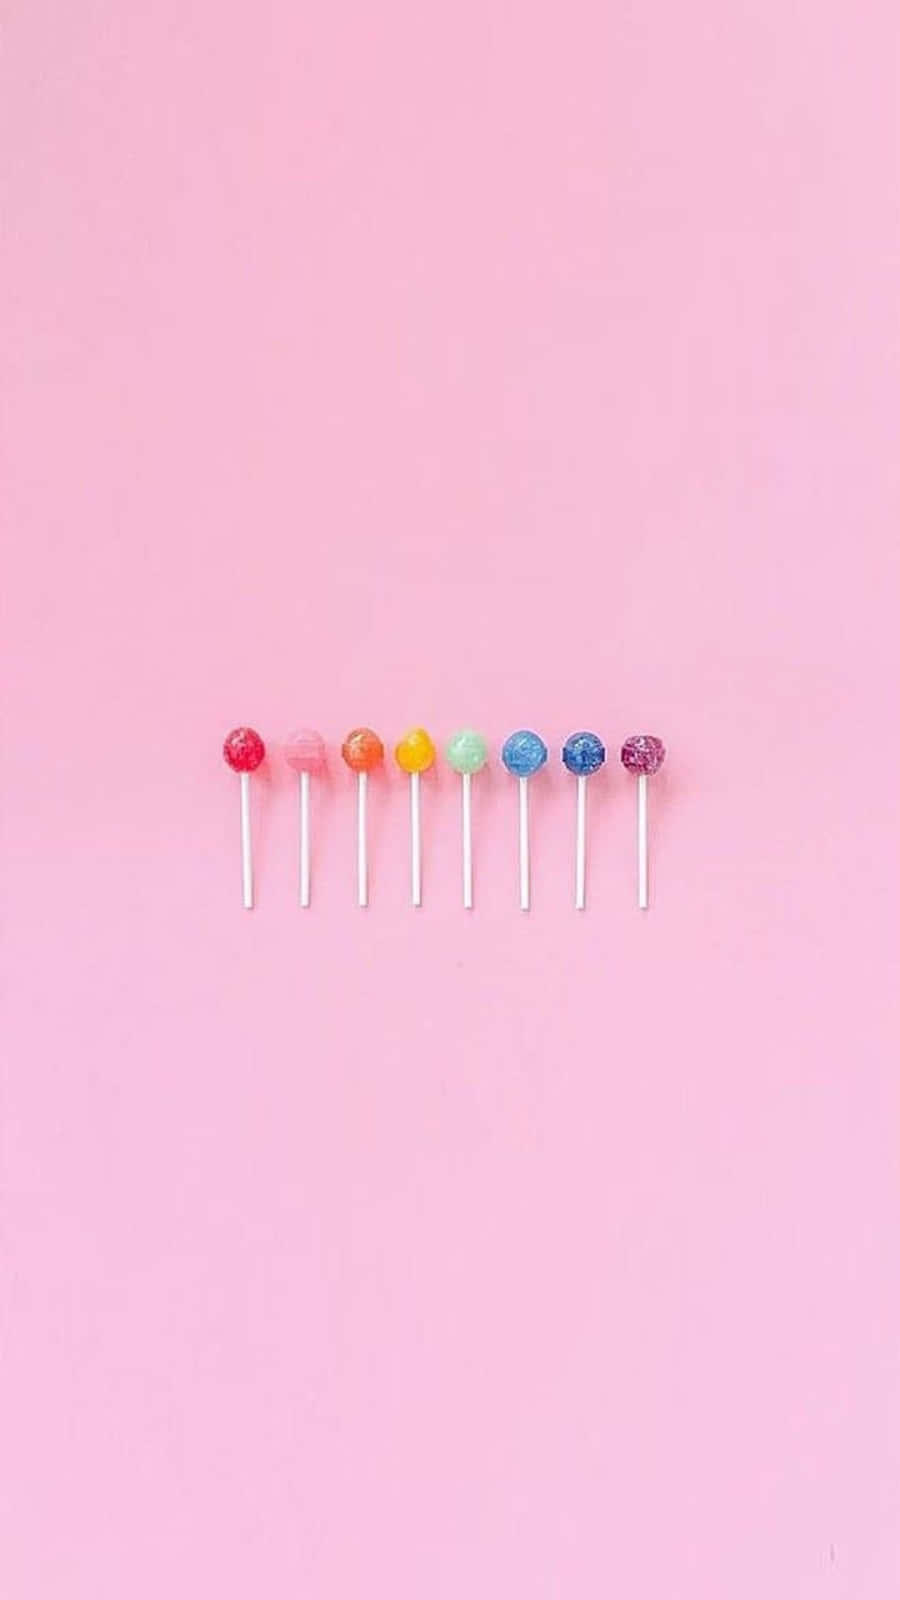 Colorful Aesthetic Lollipop Pink Background Wallpaper